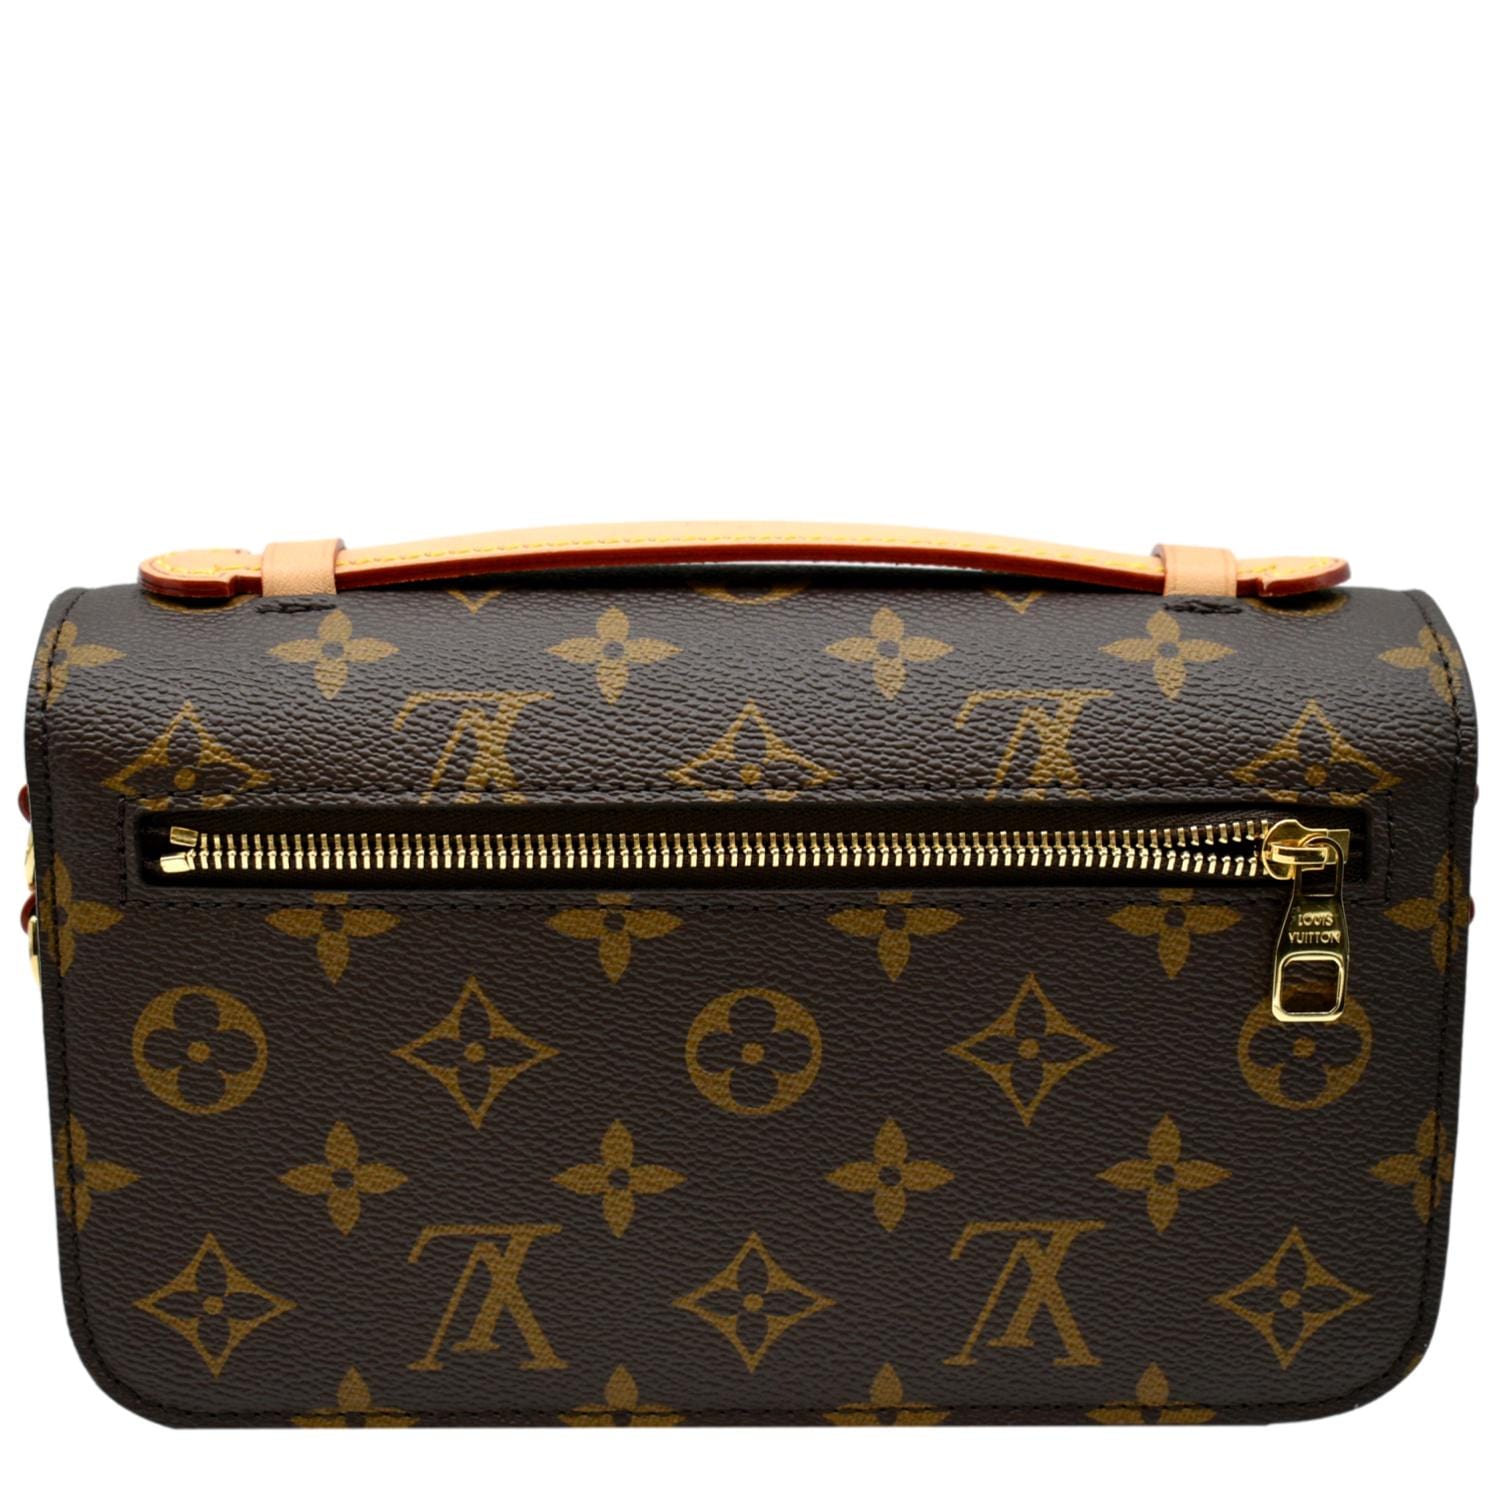 POCHETTE MÉTIS EAST WEST - Recently purchased this beauty at CDG